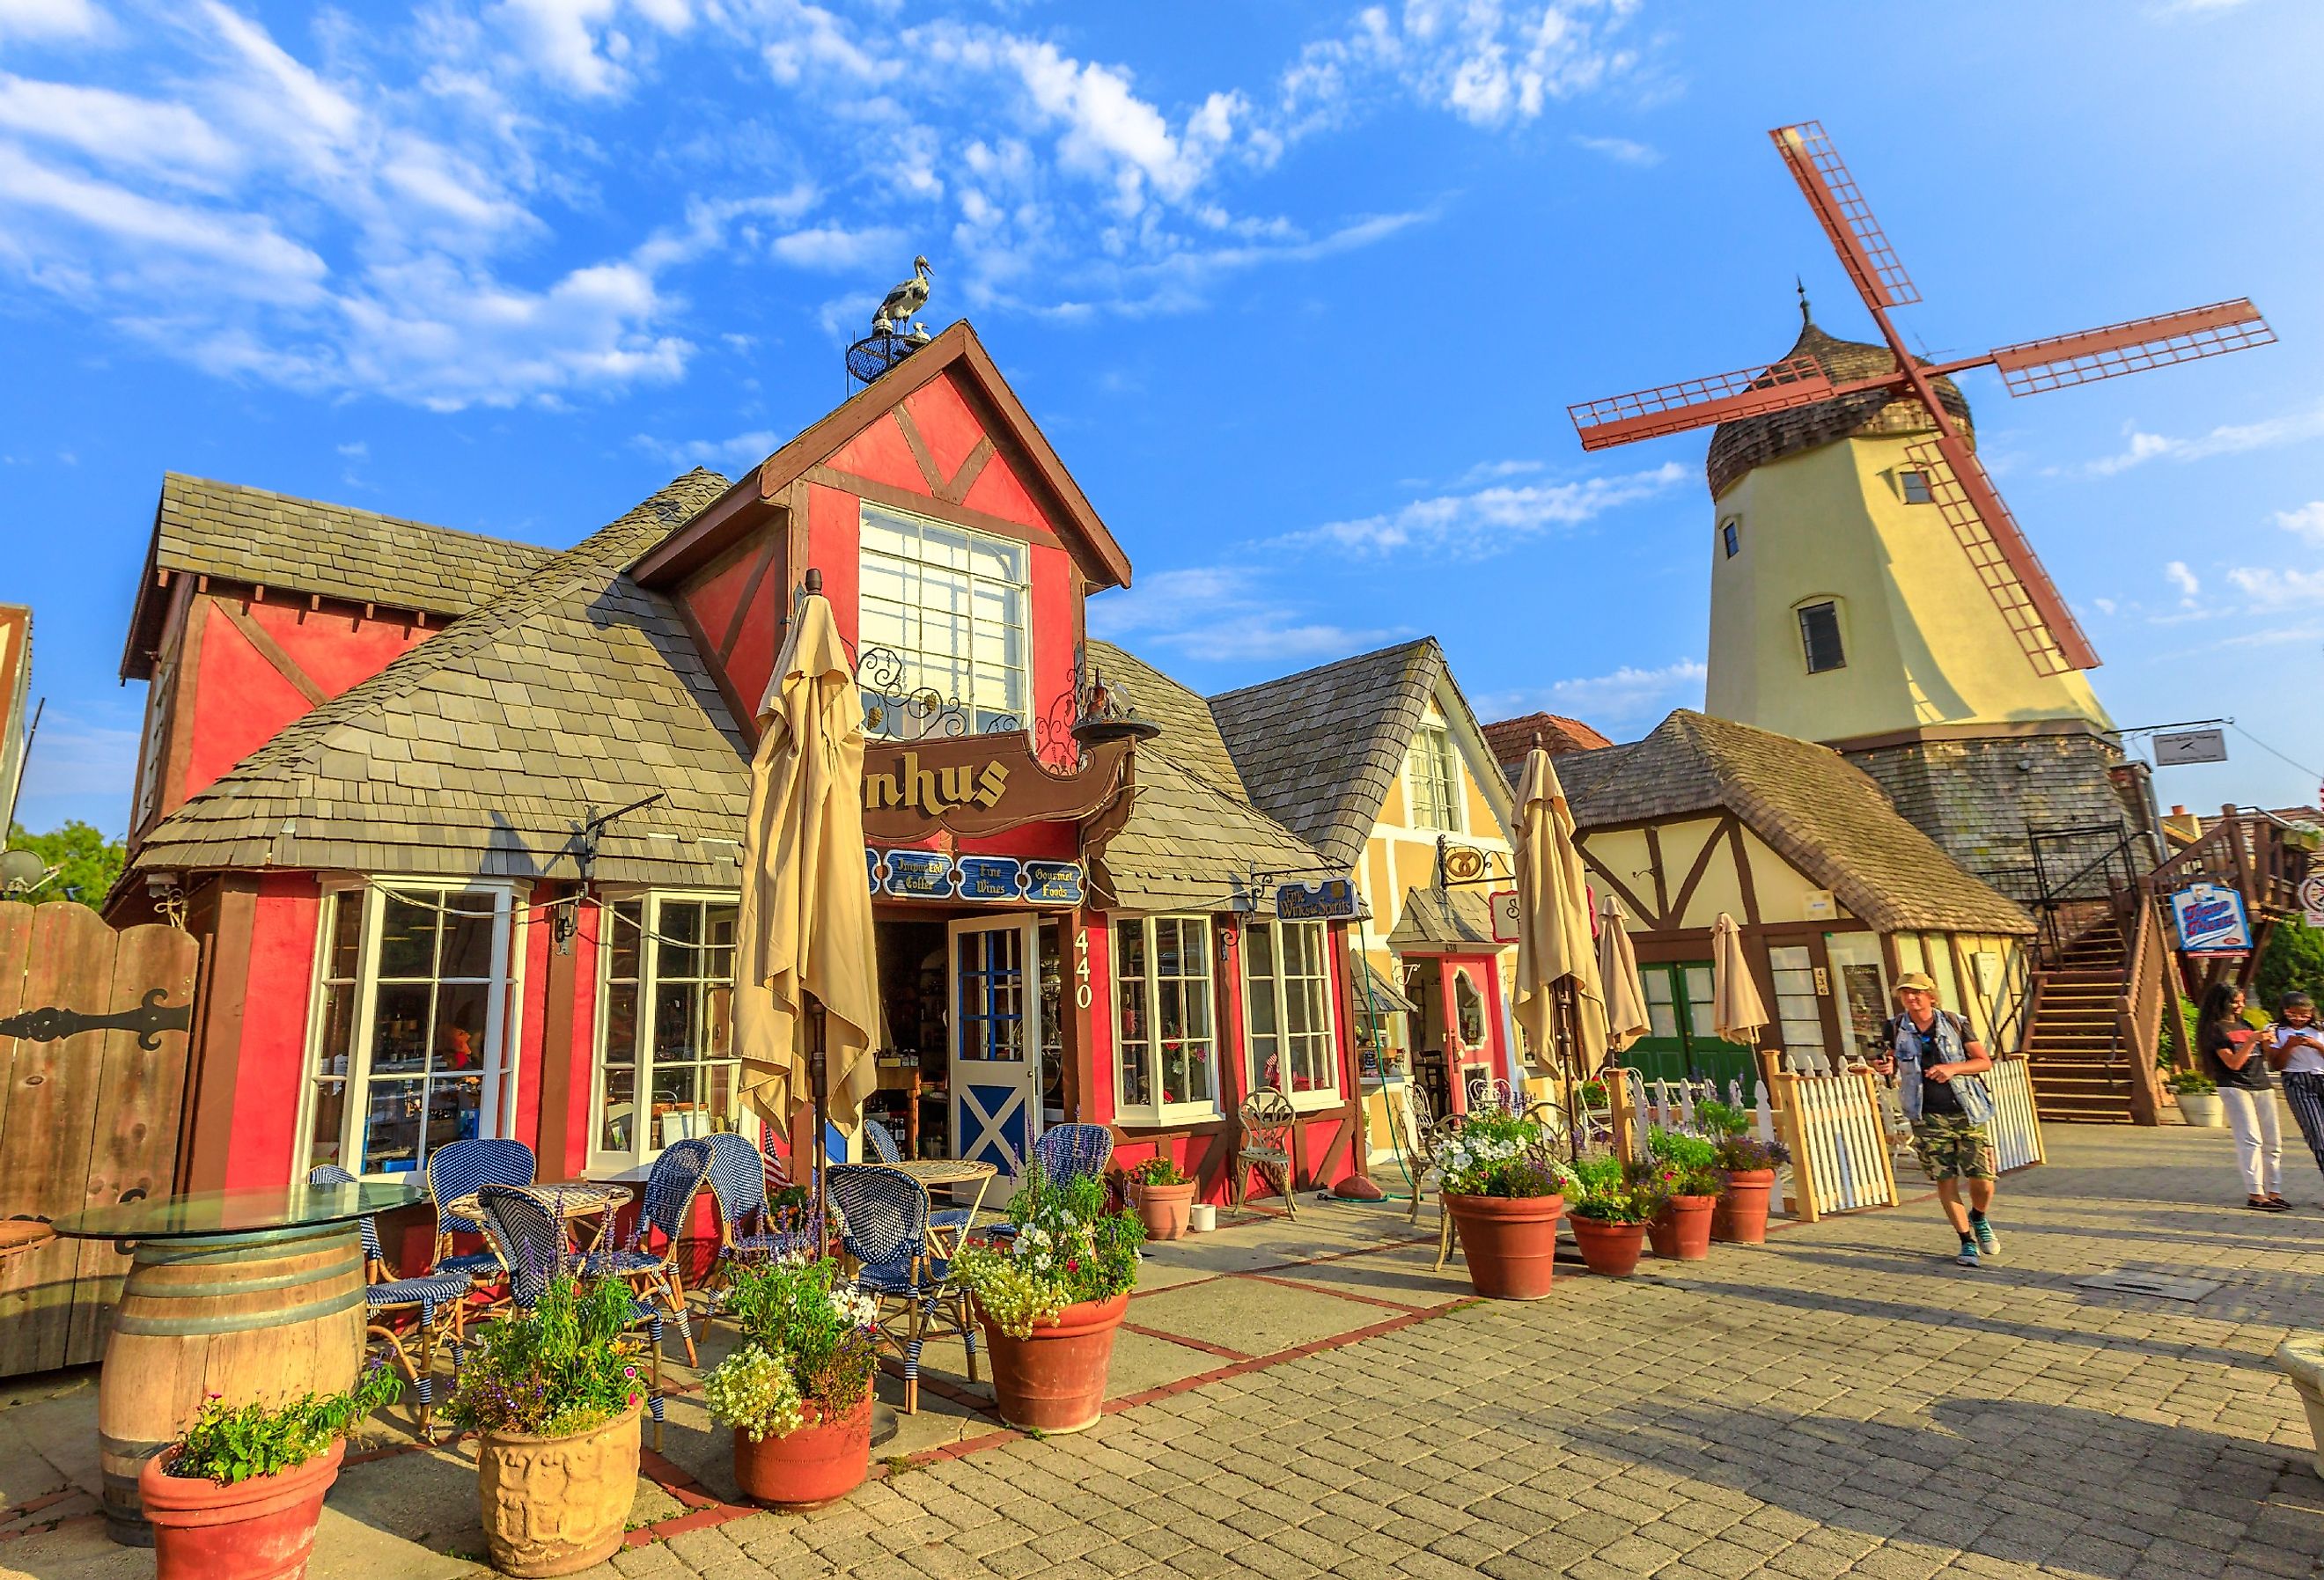 Old Windmill and the downtown sidewalks of Solvang, California. Image credit Benny Marty via Shutterstock